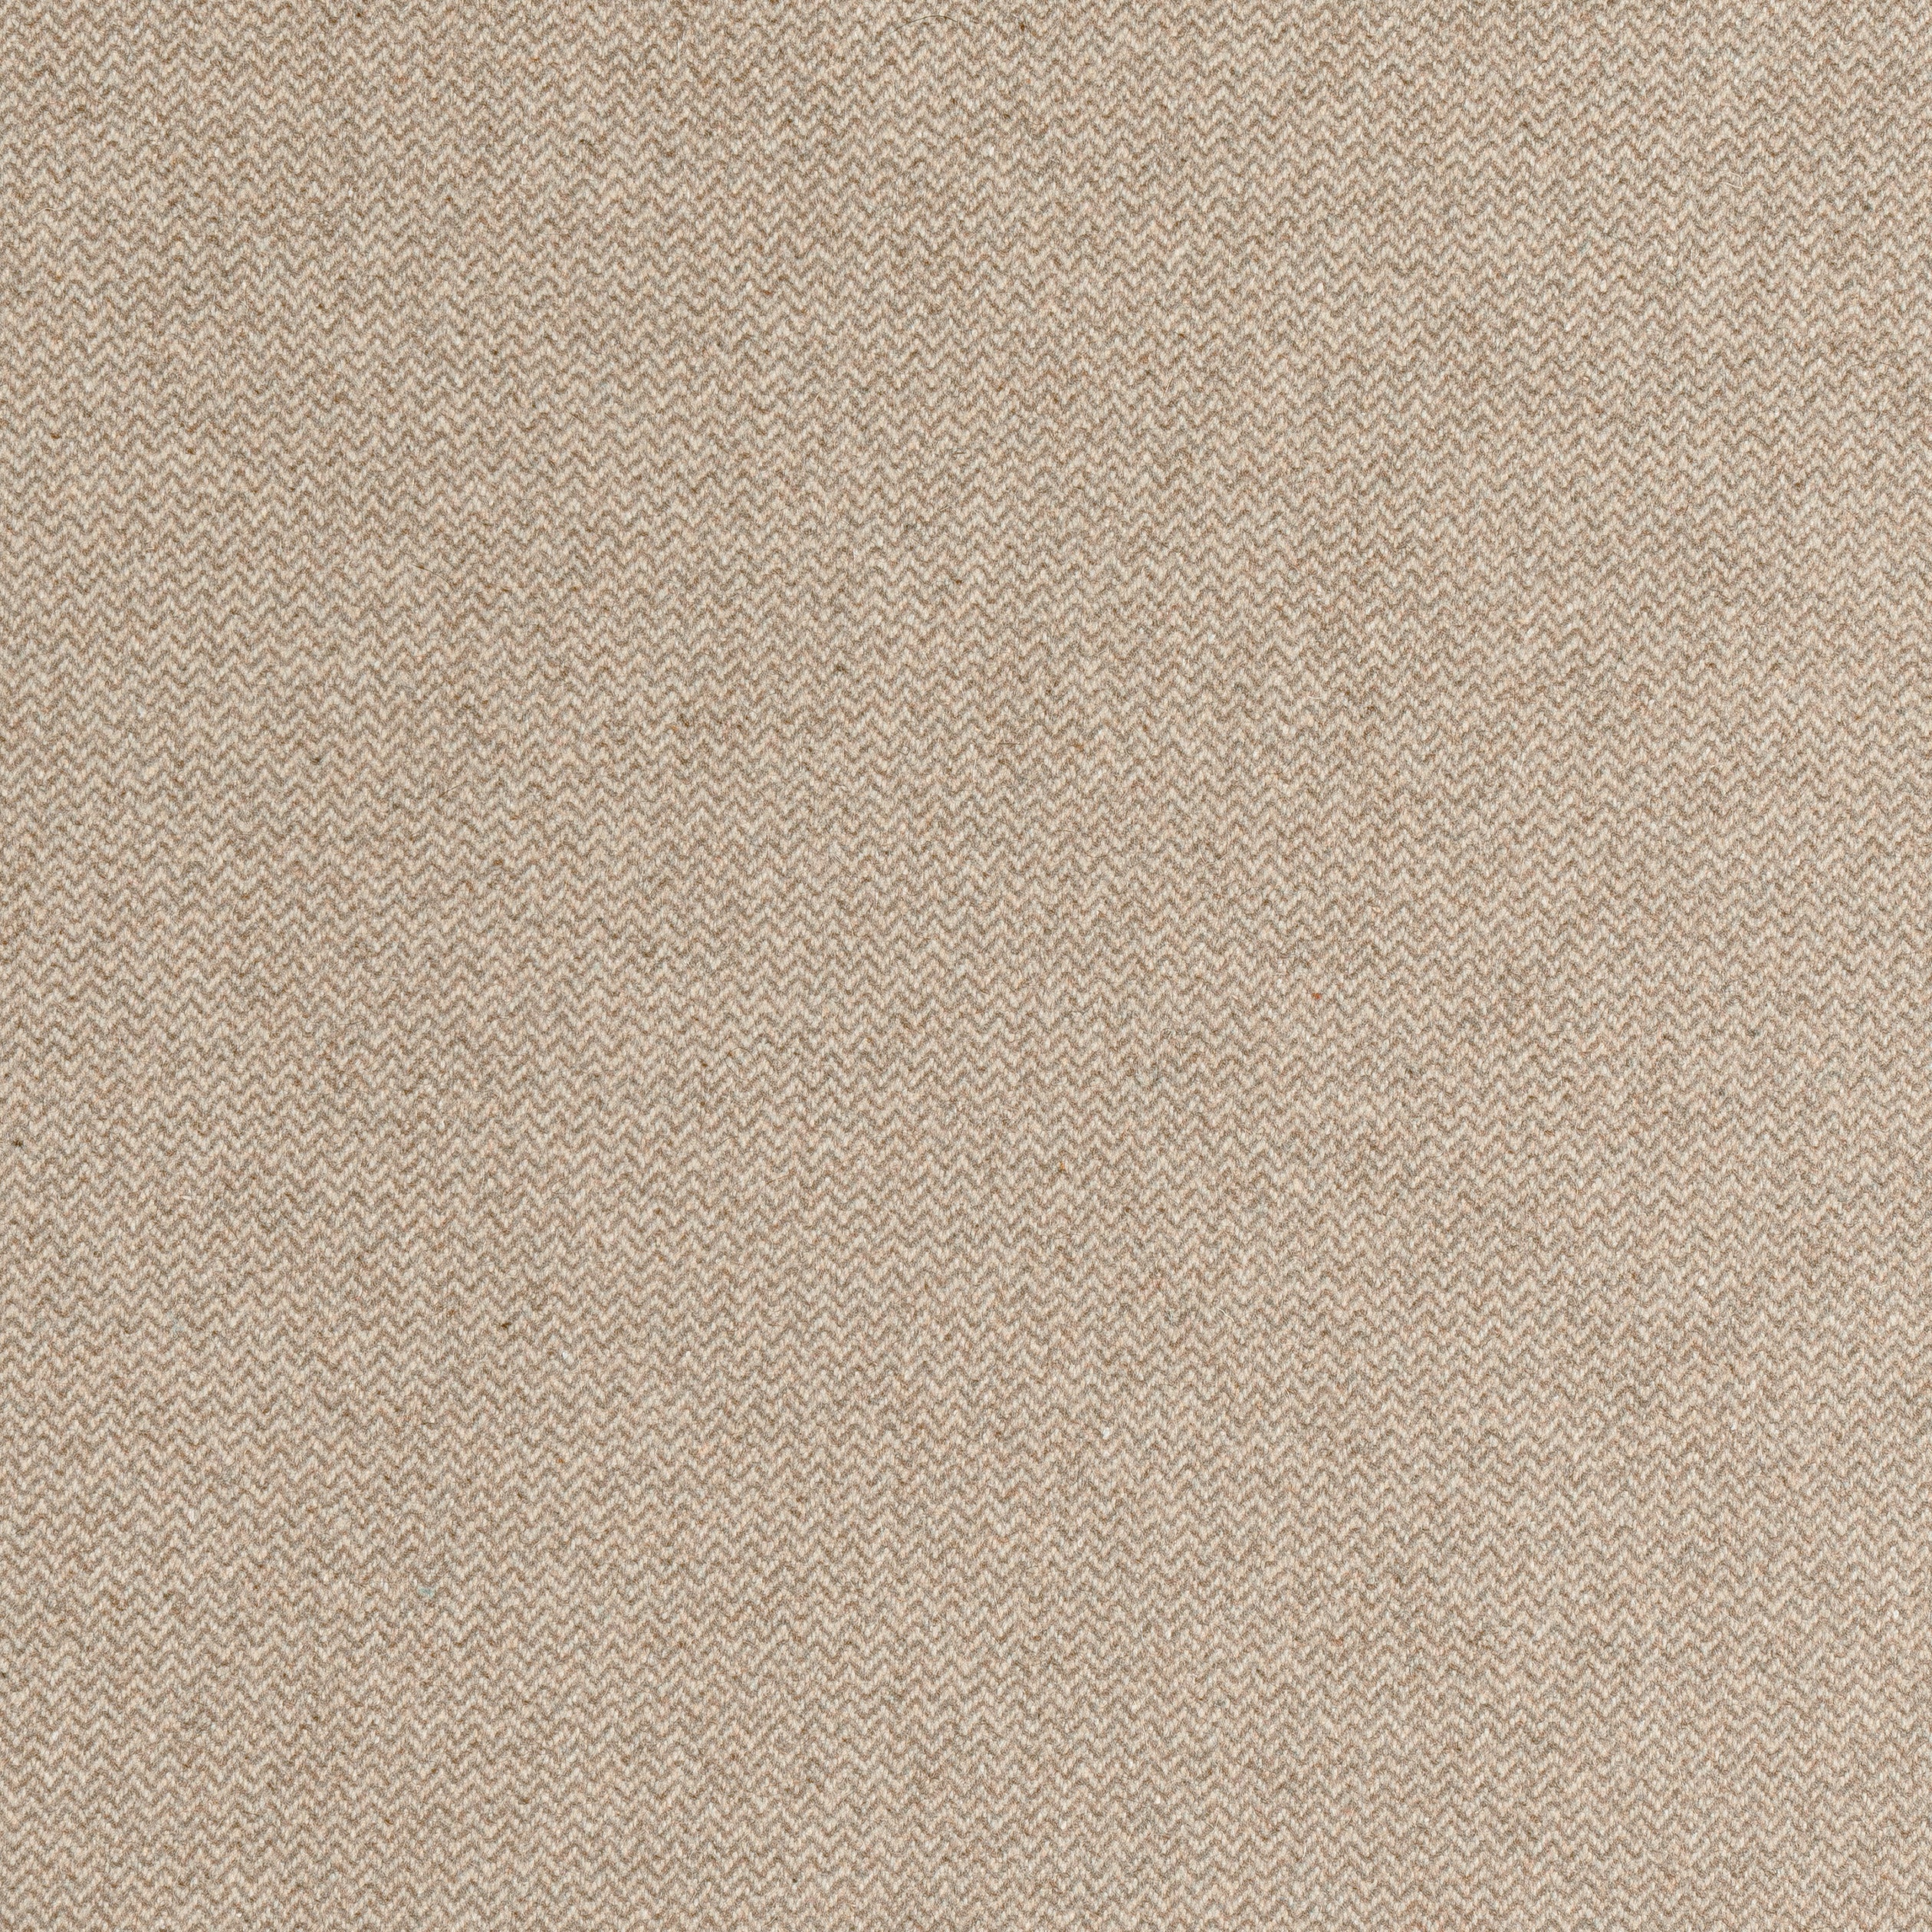 Dorset fabric in fawn color - pattern number W80918 - by Thibaut in the Dunmore collection